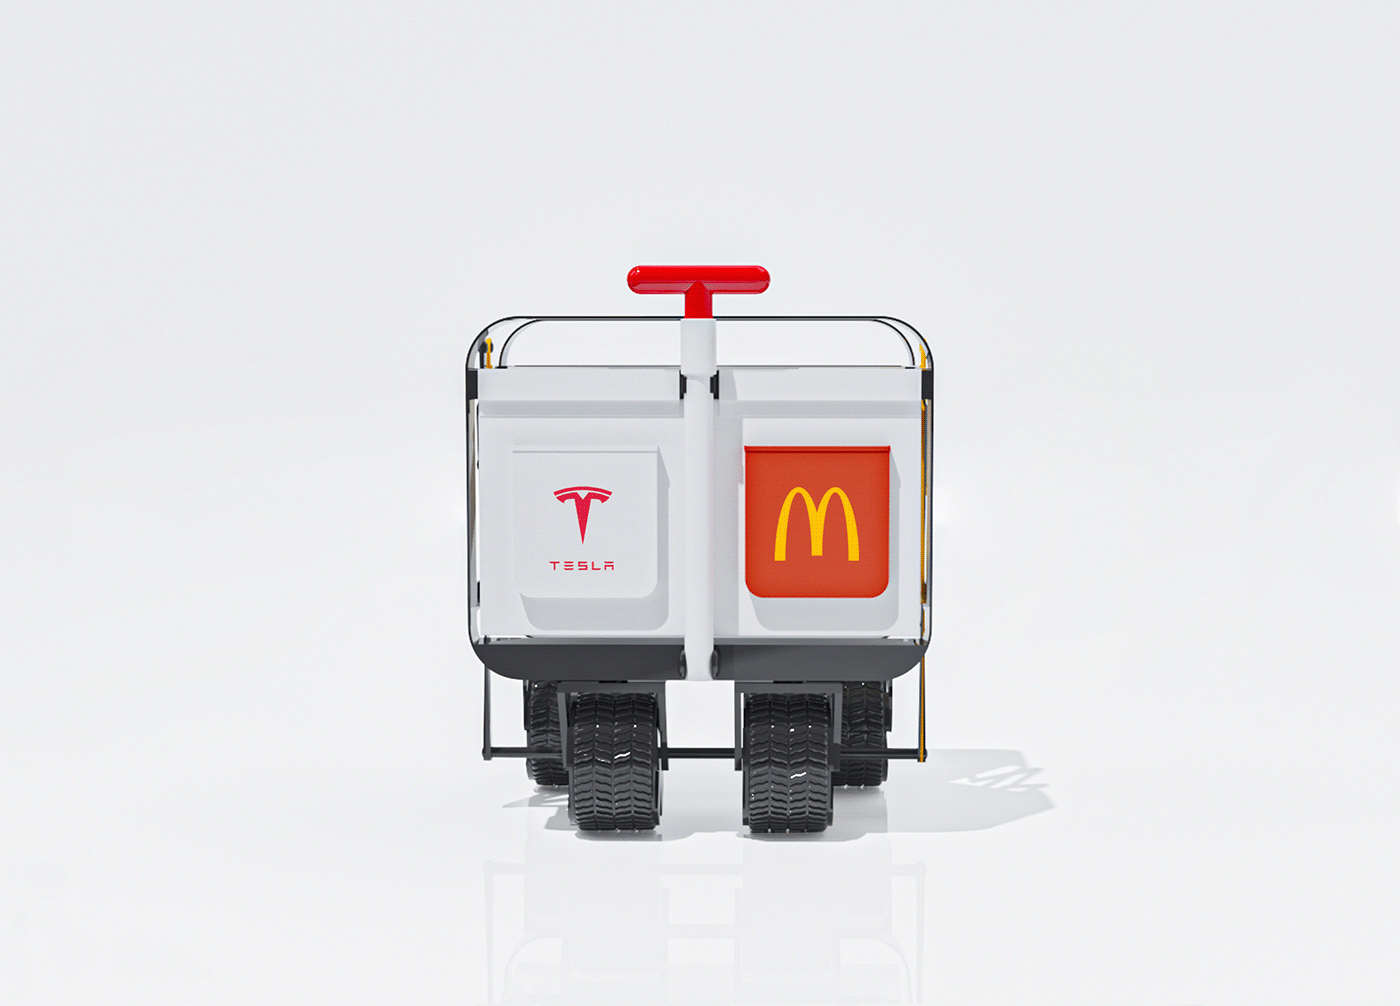 Collapsible wagon 3D vray Rhino 3D product design  industrial design idea